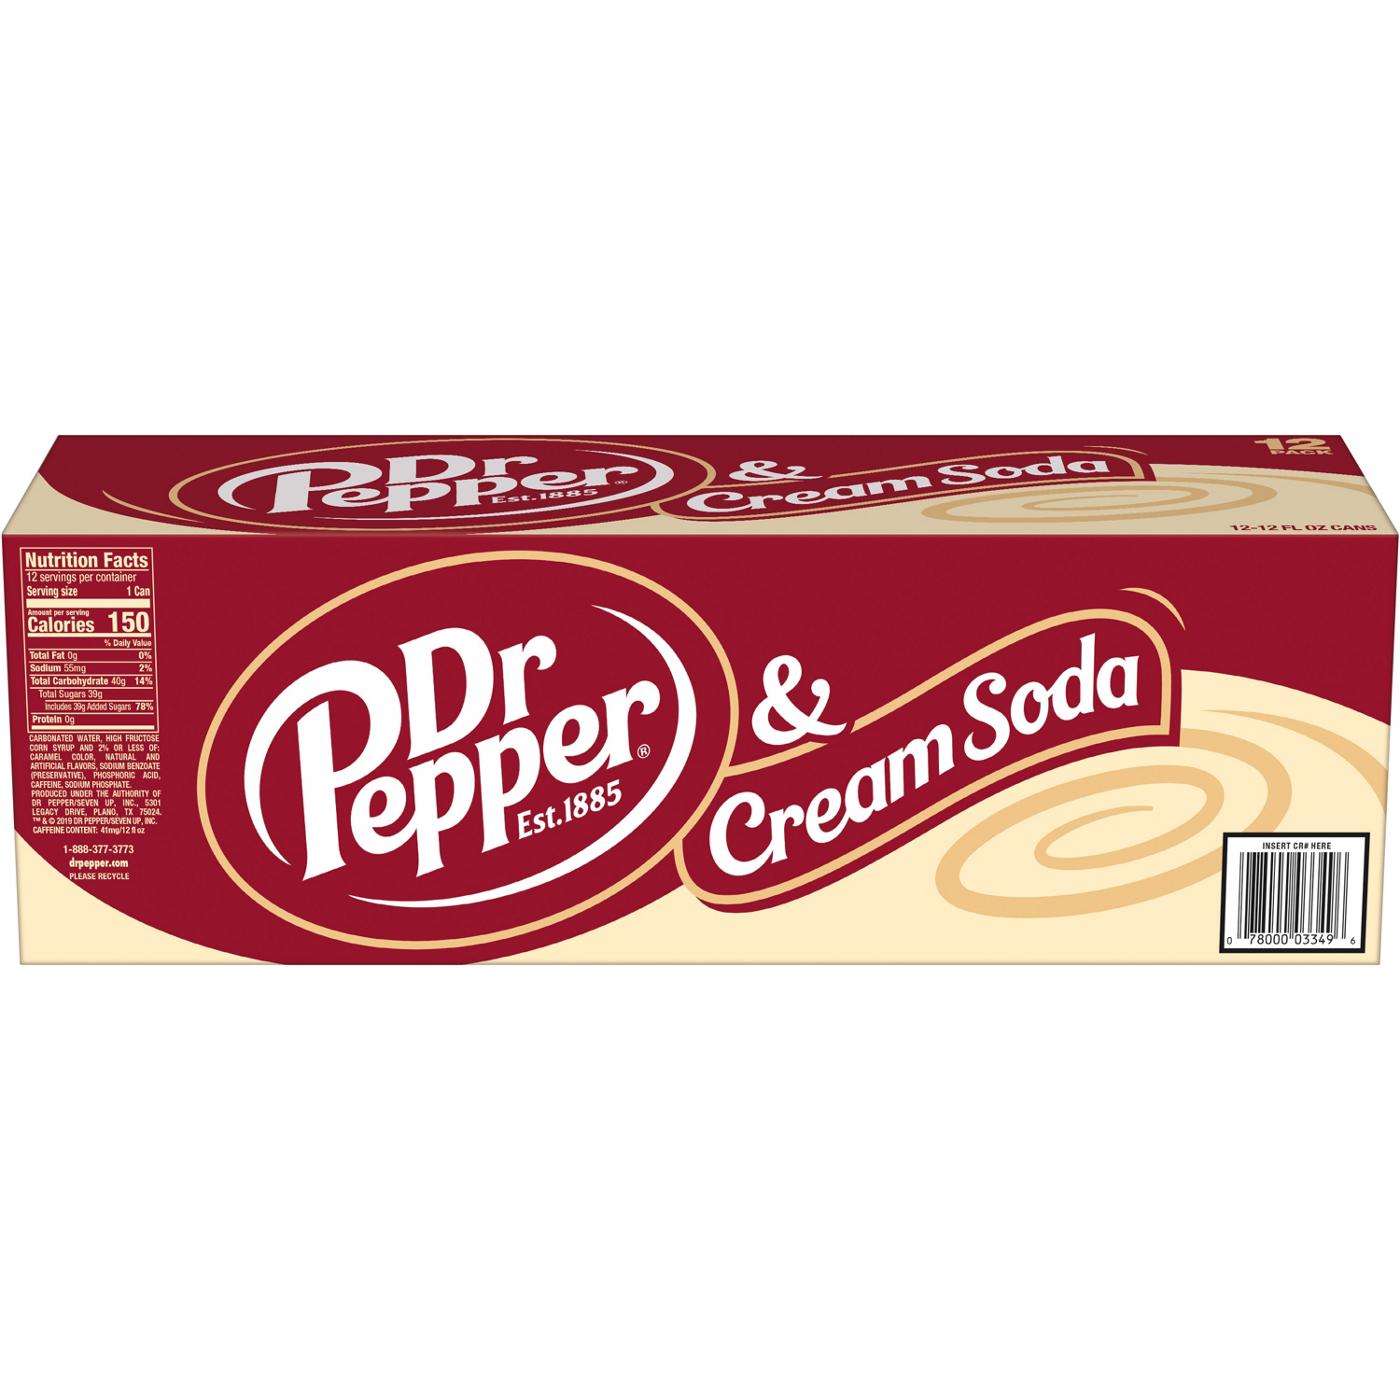 Dr Pepper & Cream Soda 12 oz Cans; image 4 of 7